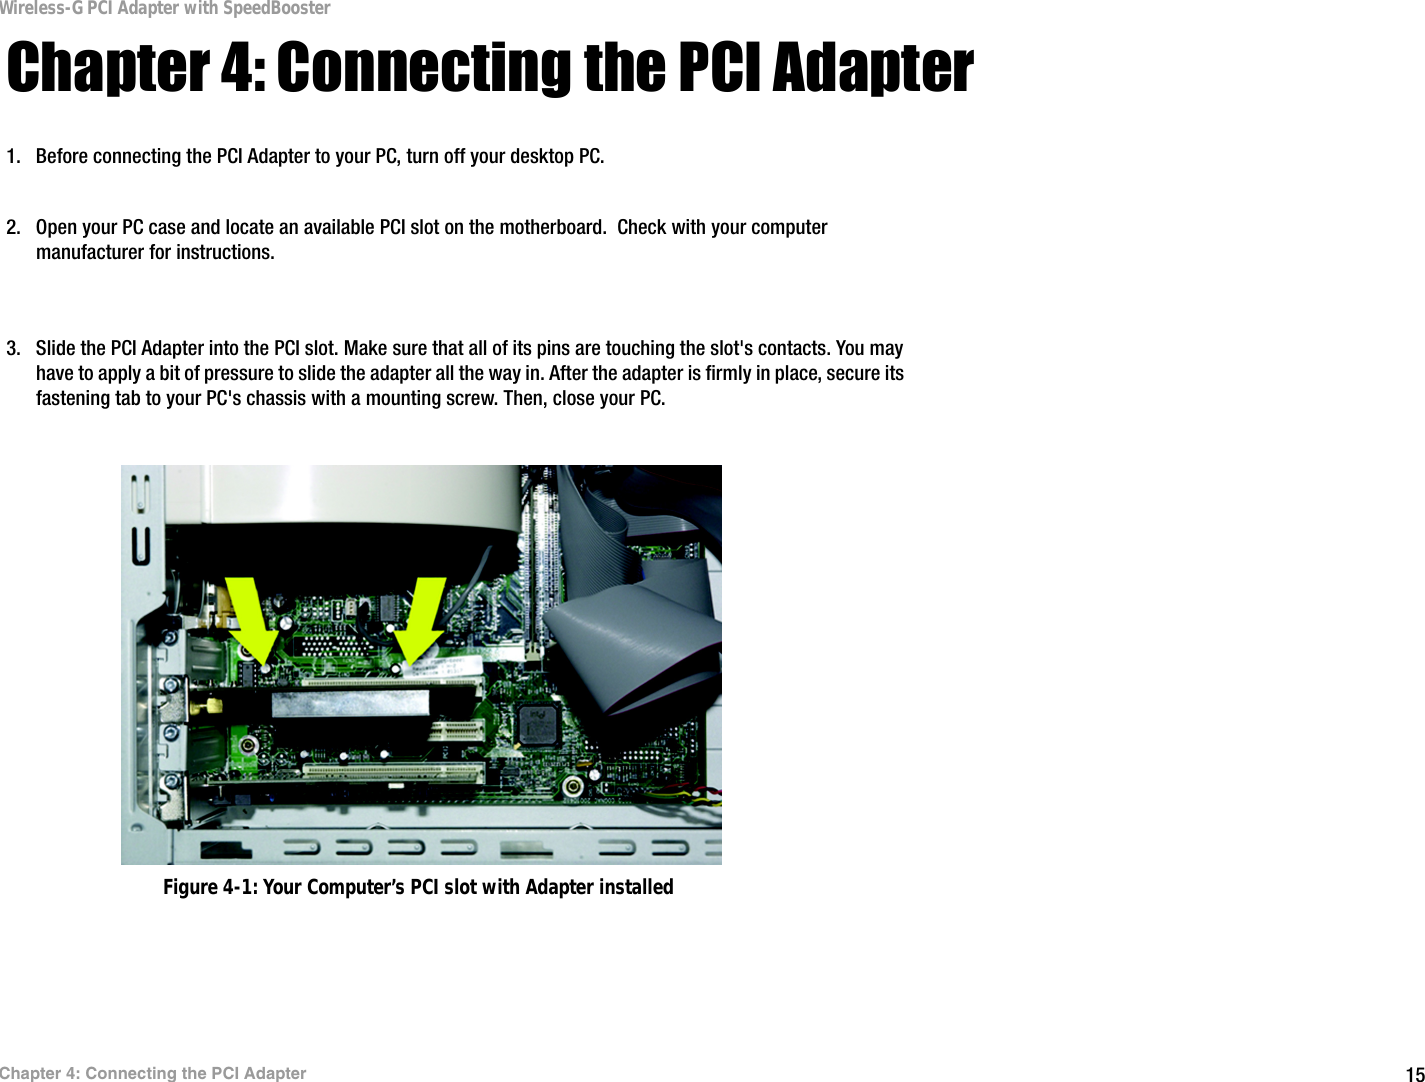 15Chapter 4: Connecting the PCI AdapterWireless-G PCI Adapter with SpeedBoosterChapter 4: Connecting the PCI Adapter1. Before connecting the PCI Adapter to your PC, turn off your desktop PC.  2. Open your PC case and locate an available PCI slot on the motherboard.  Check with your computer manufacturer for instructions. 3. Slide the PCI Adapter into the PCI slot. Make sure that all of its pins are touching the slot&apos;s contacts. You may have to apply a bit of pressure to slide the adapter all the way in. After the adapter is firmly in place, secure its fastening tab to your PC&apos;s chassis with a mounting screw. Then, close your PC. Figure 4-1: Your Computer’s PCI slot with Adapter installed